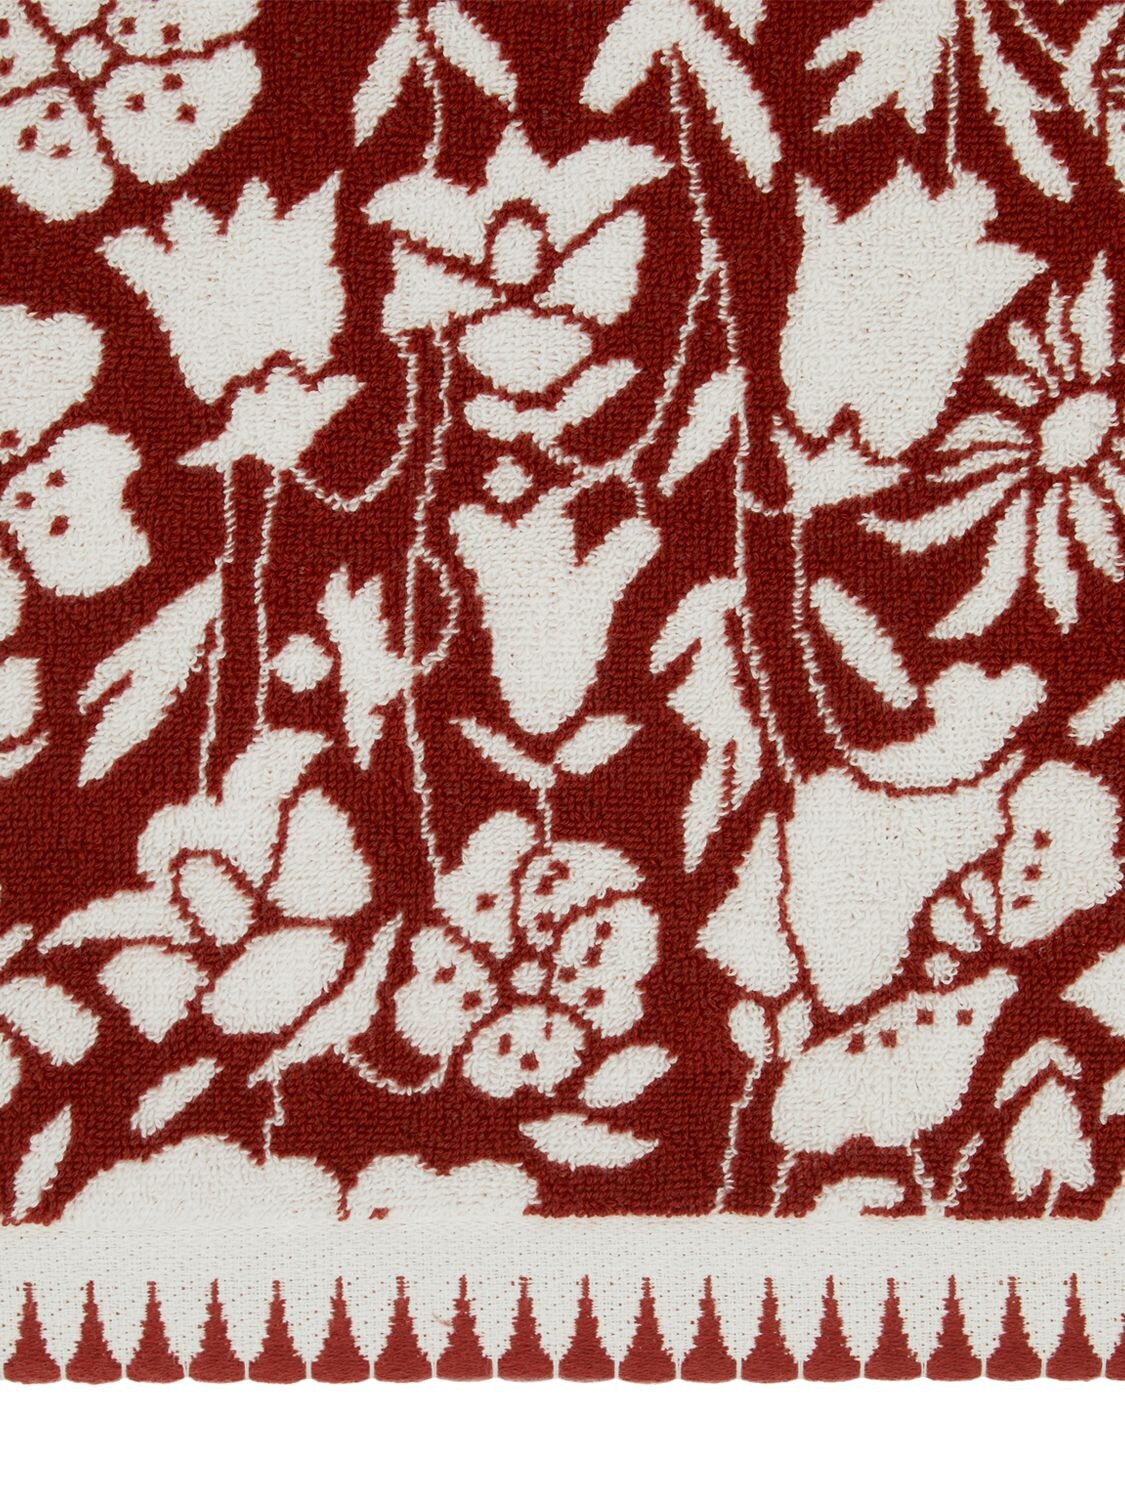 Shop Liberty Poppy Hand Towel In Red